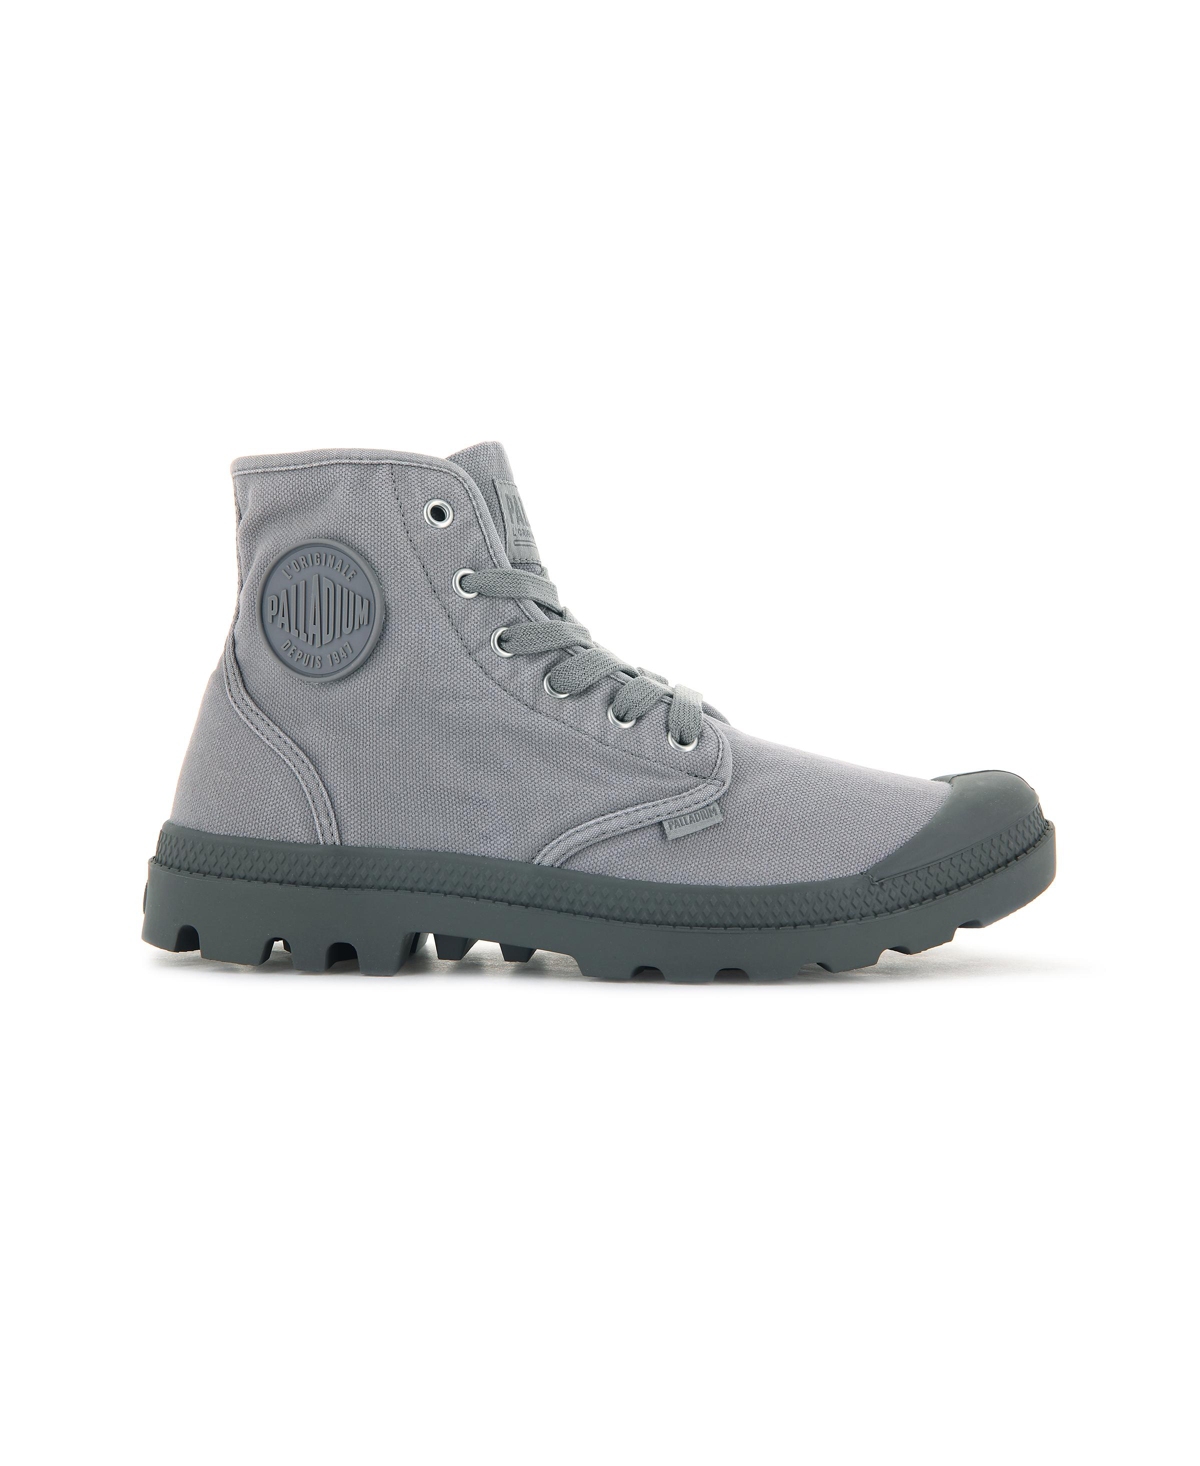 Mens Pampa Hi Boots - Gray flannel